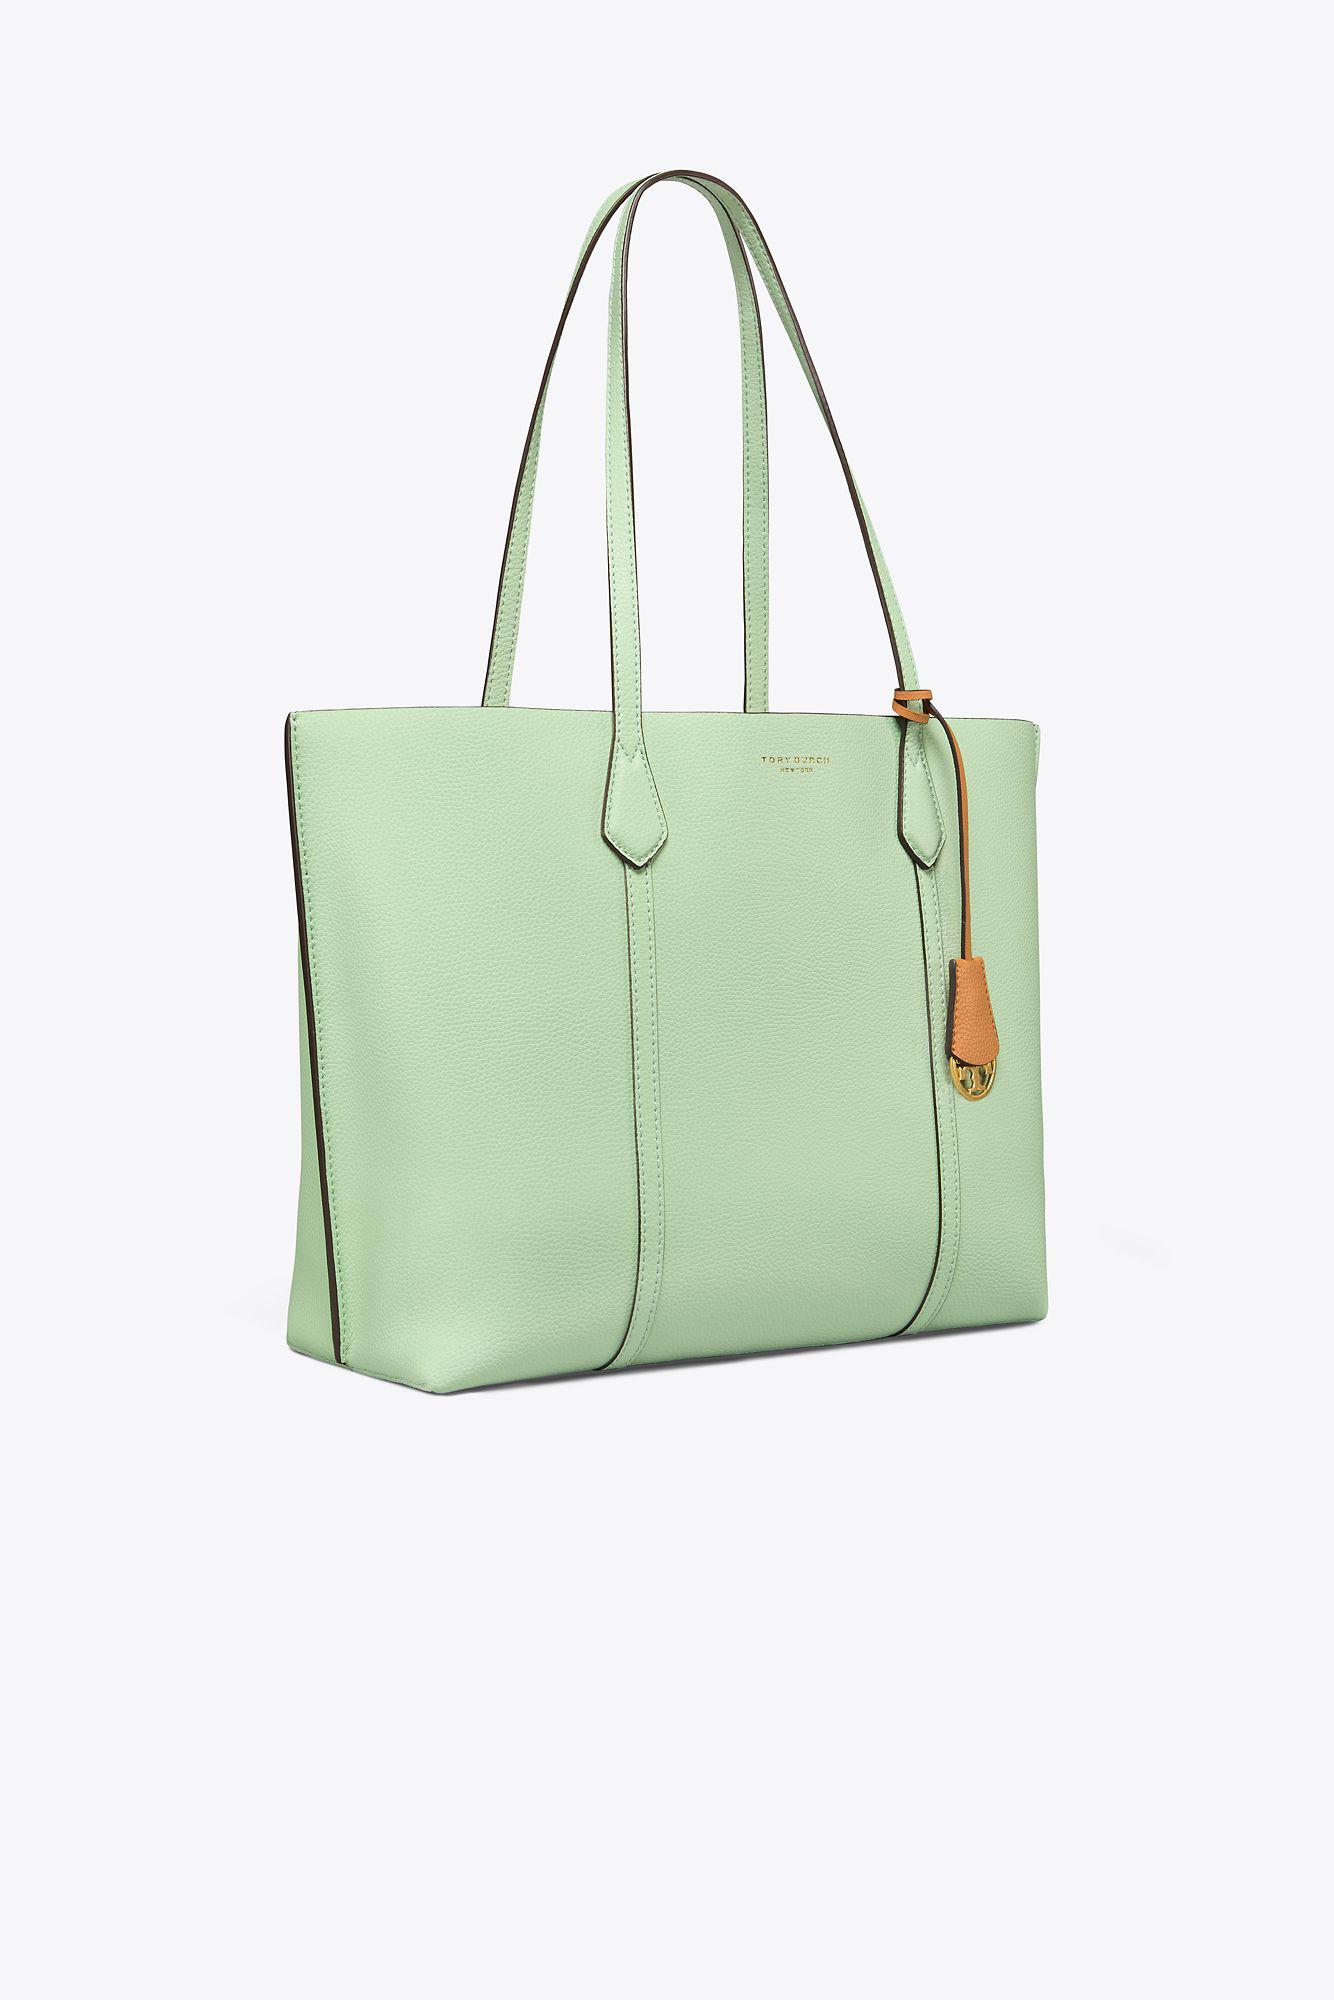 Tory Burch Leather Perry Triple-compartment Tote in Mint Green (Green ...